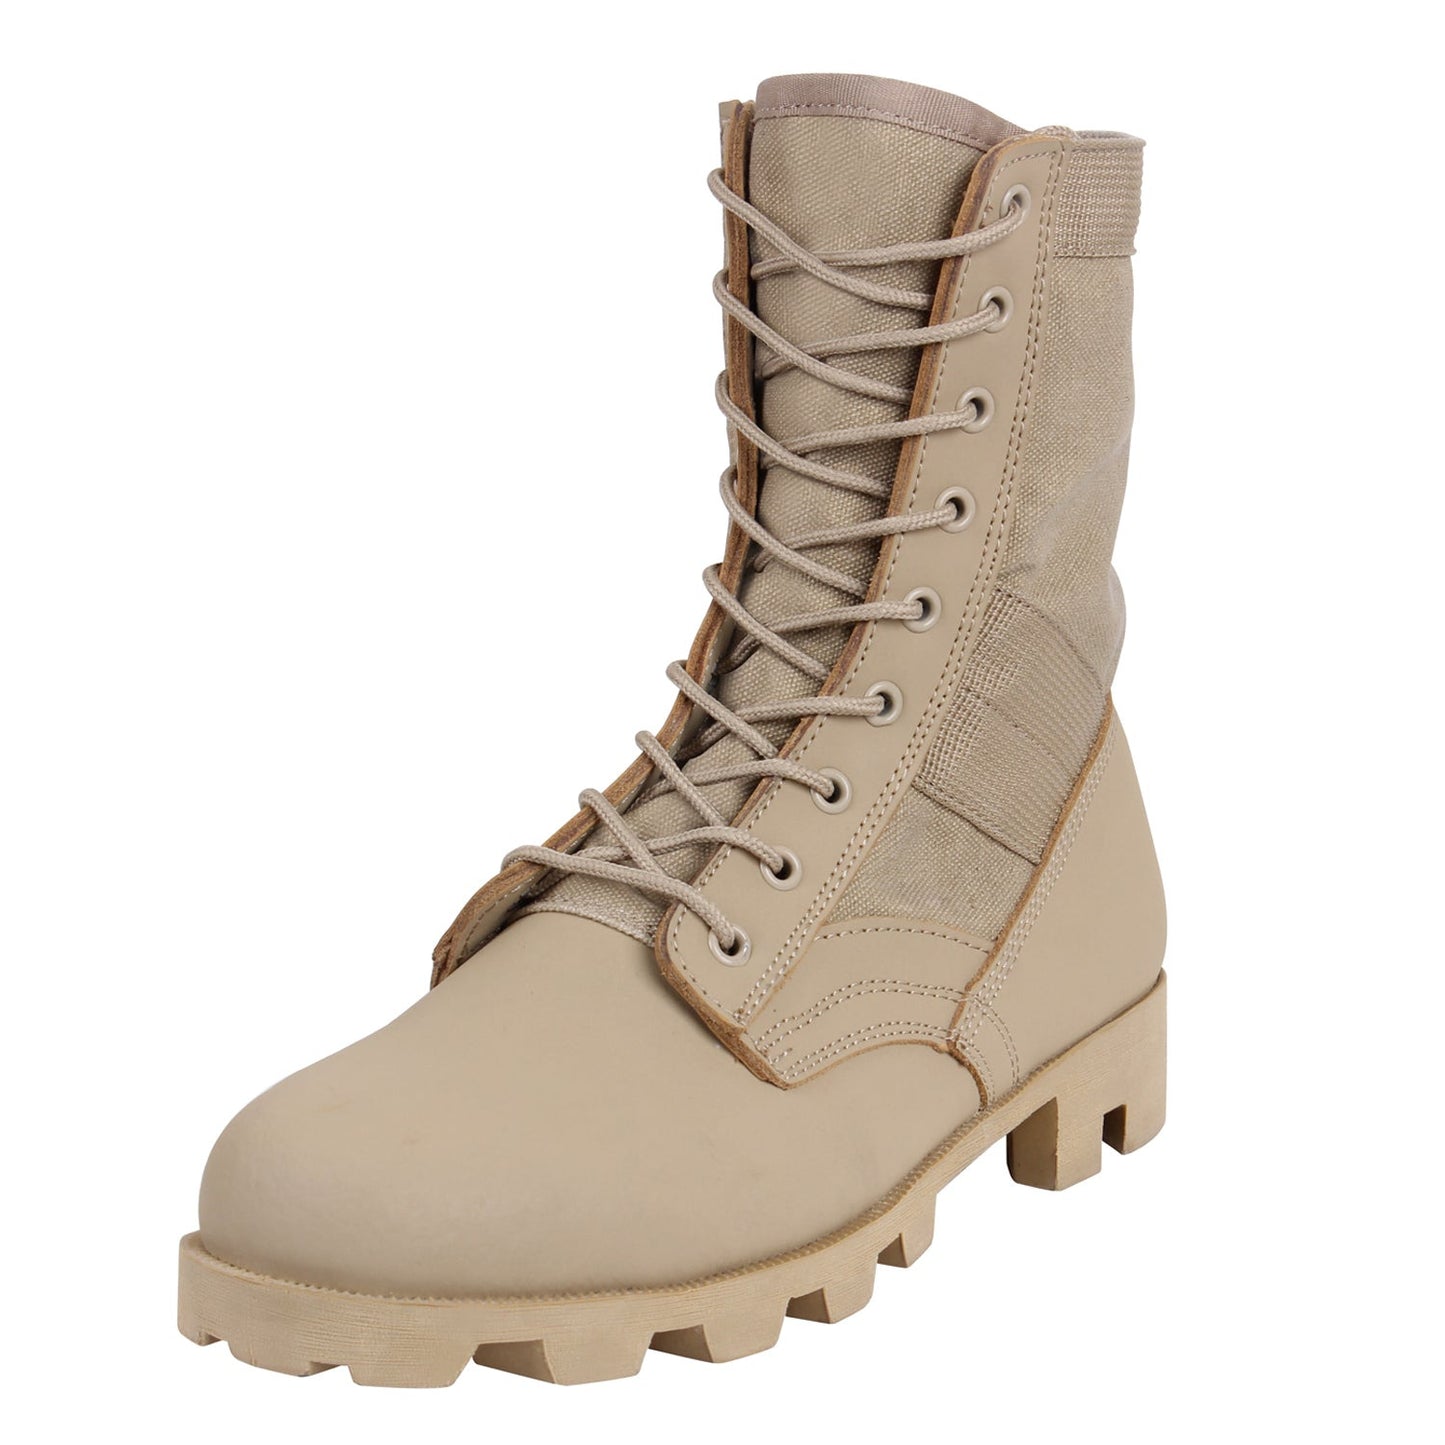 With the rugged design of a combat boot and the lightweight feel of a running shoe, Rothco’s Military Jungle Boots provide unparalleled tread, flexibility, and comfort while you perform combat training, rucking, playing a competitive game of paintball, and many other outdoor activities.